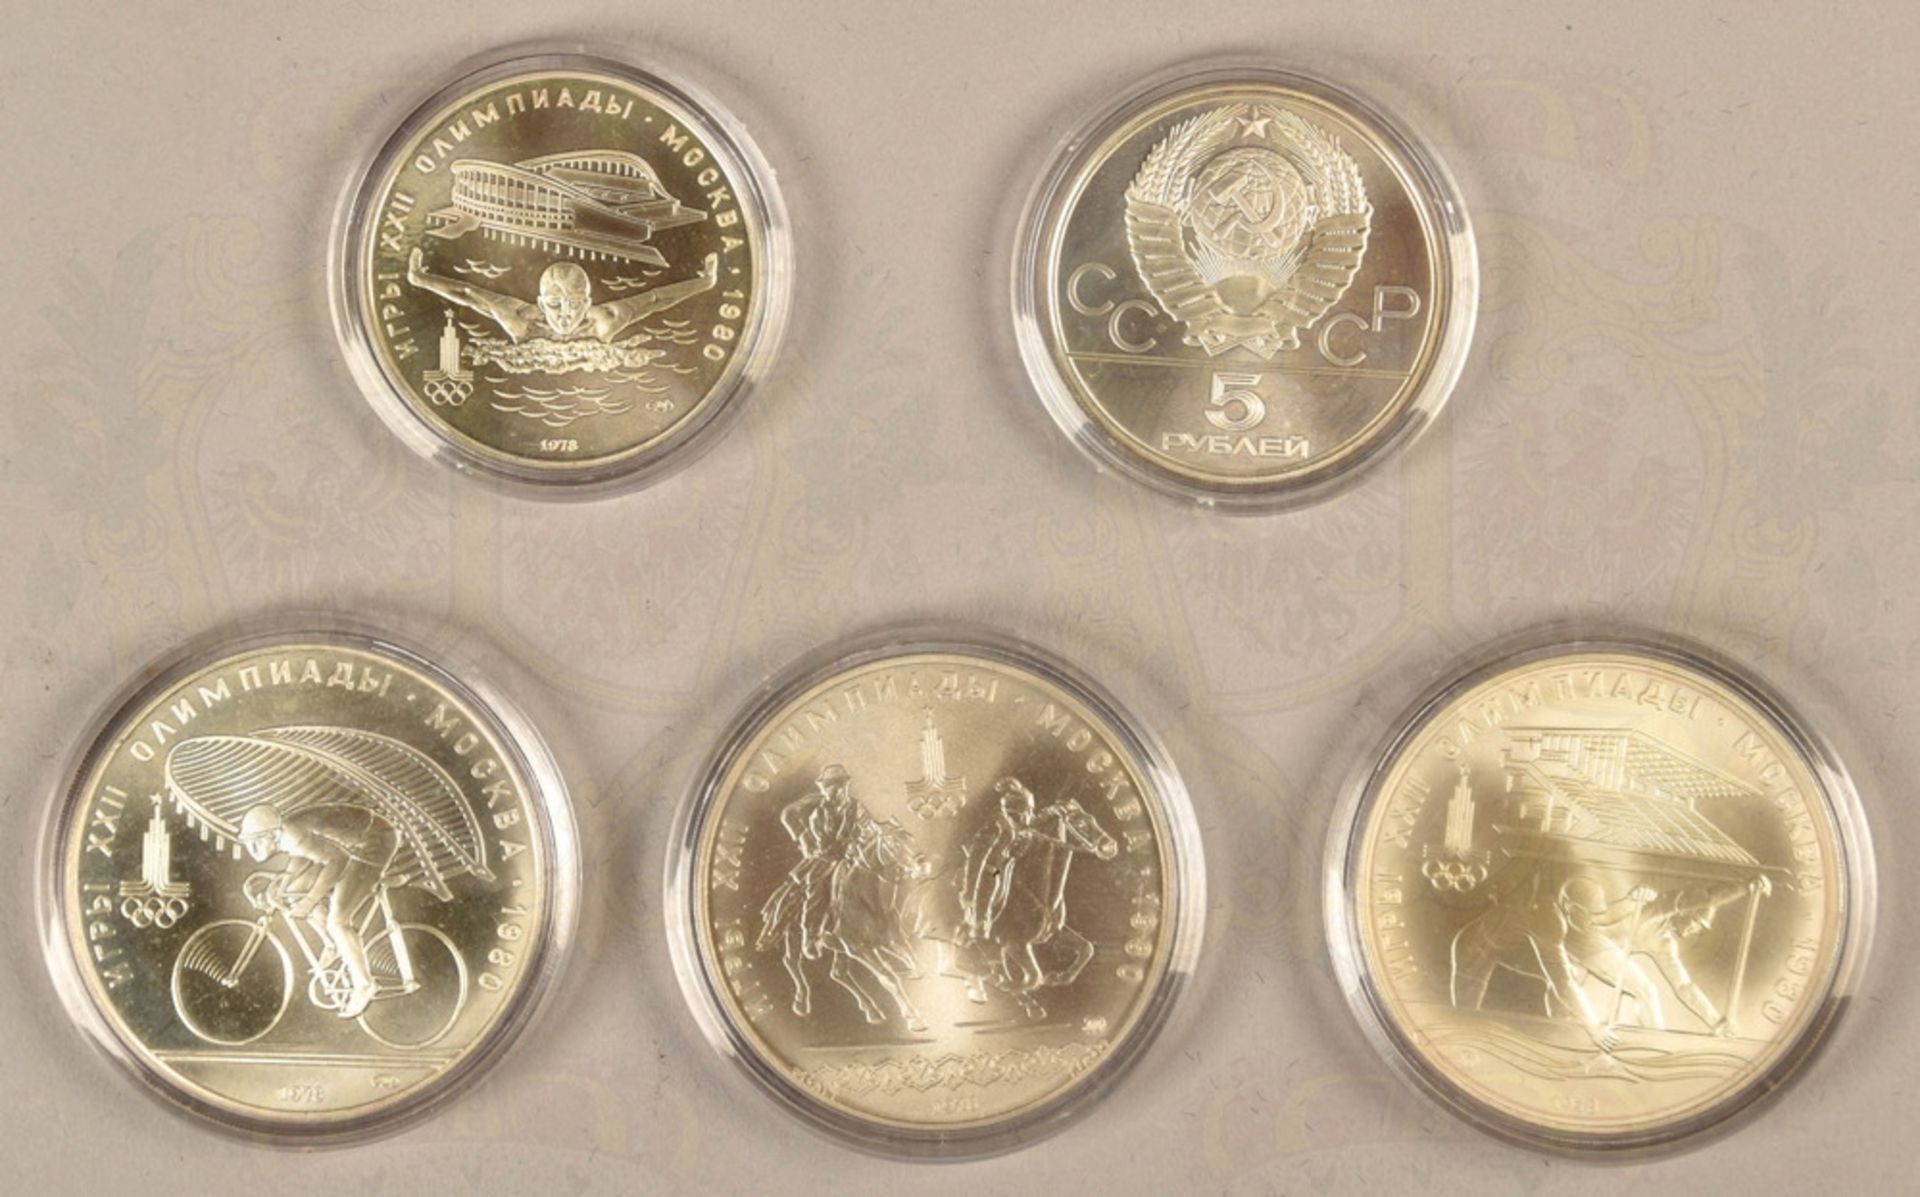 Set of 5 silver coins Olympic Games Moscow 1980 - Image 2 of 3